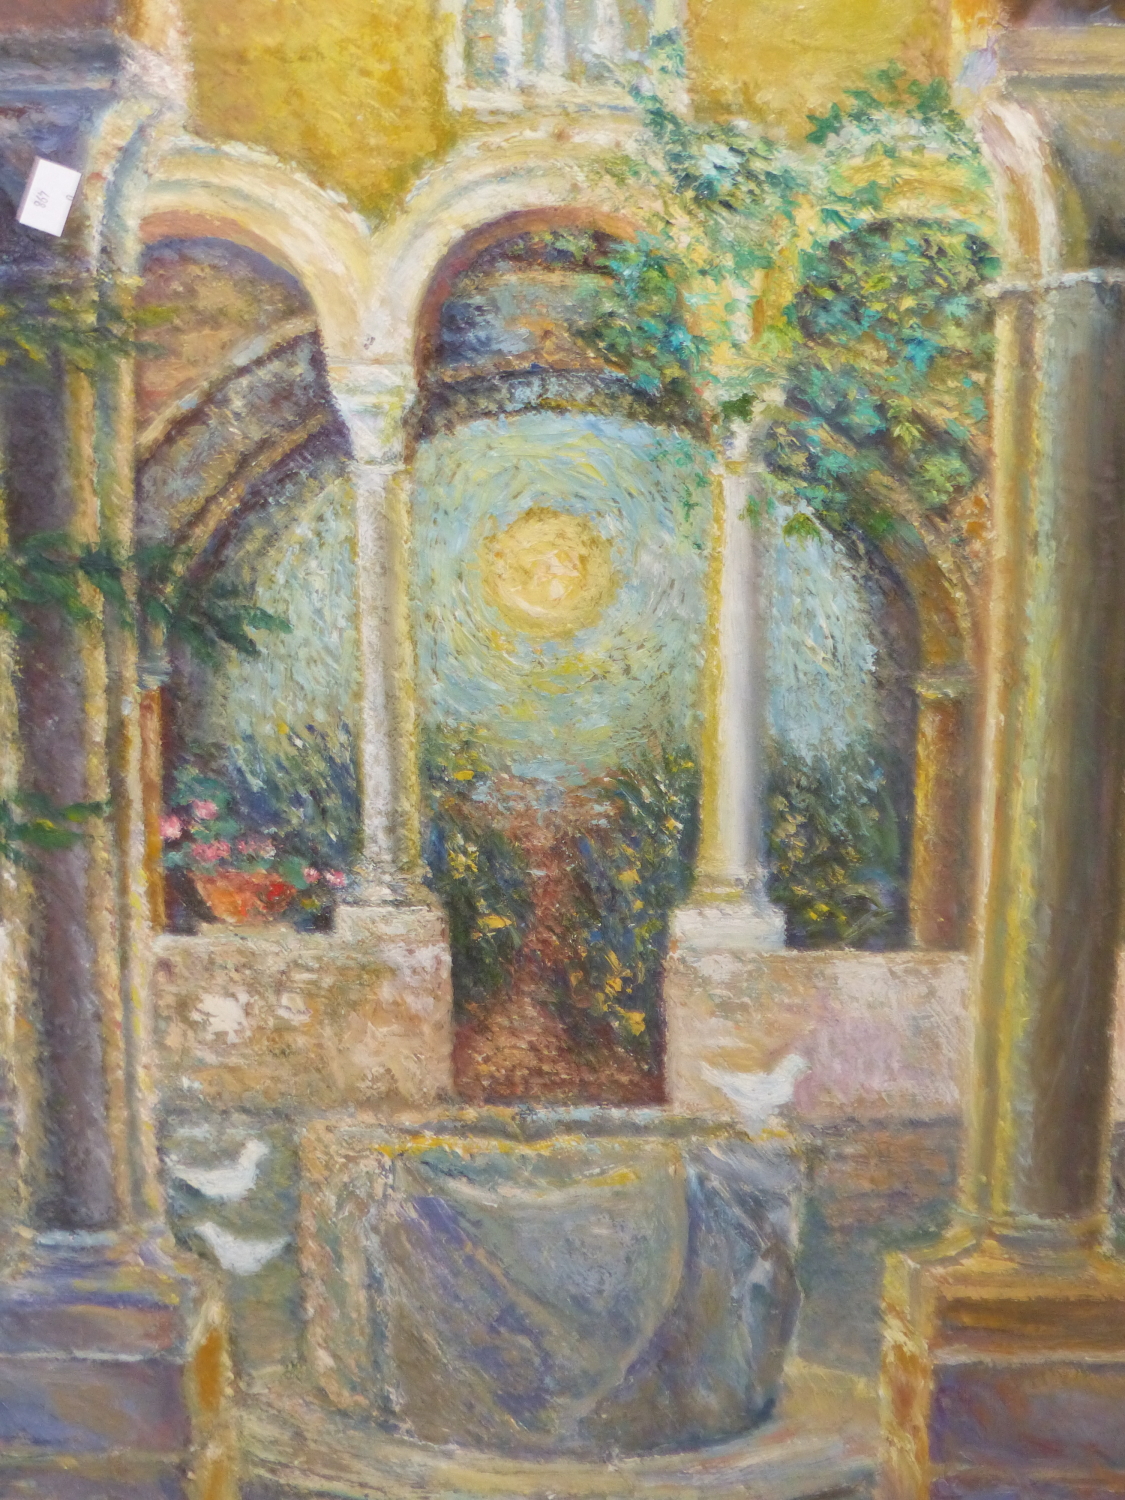 CONTINENTAL SCHOOL (20TH CENTURY), INTERIOR COURTYARD SCENE WITH DOVES AROUND A WELL, IMPASTO OIL, - Image 5 of 6